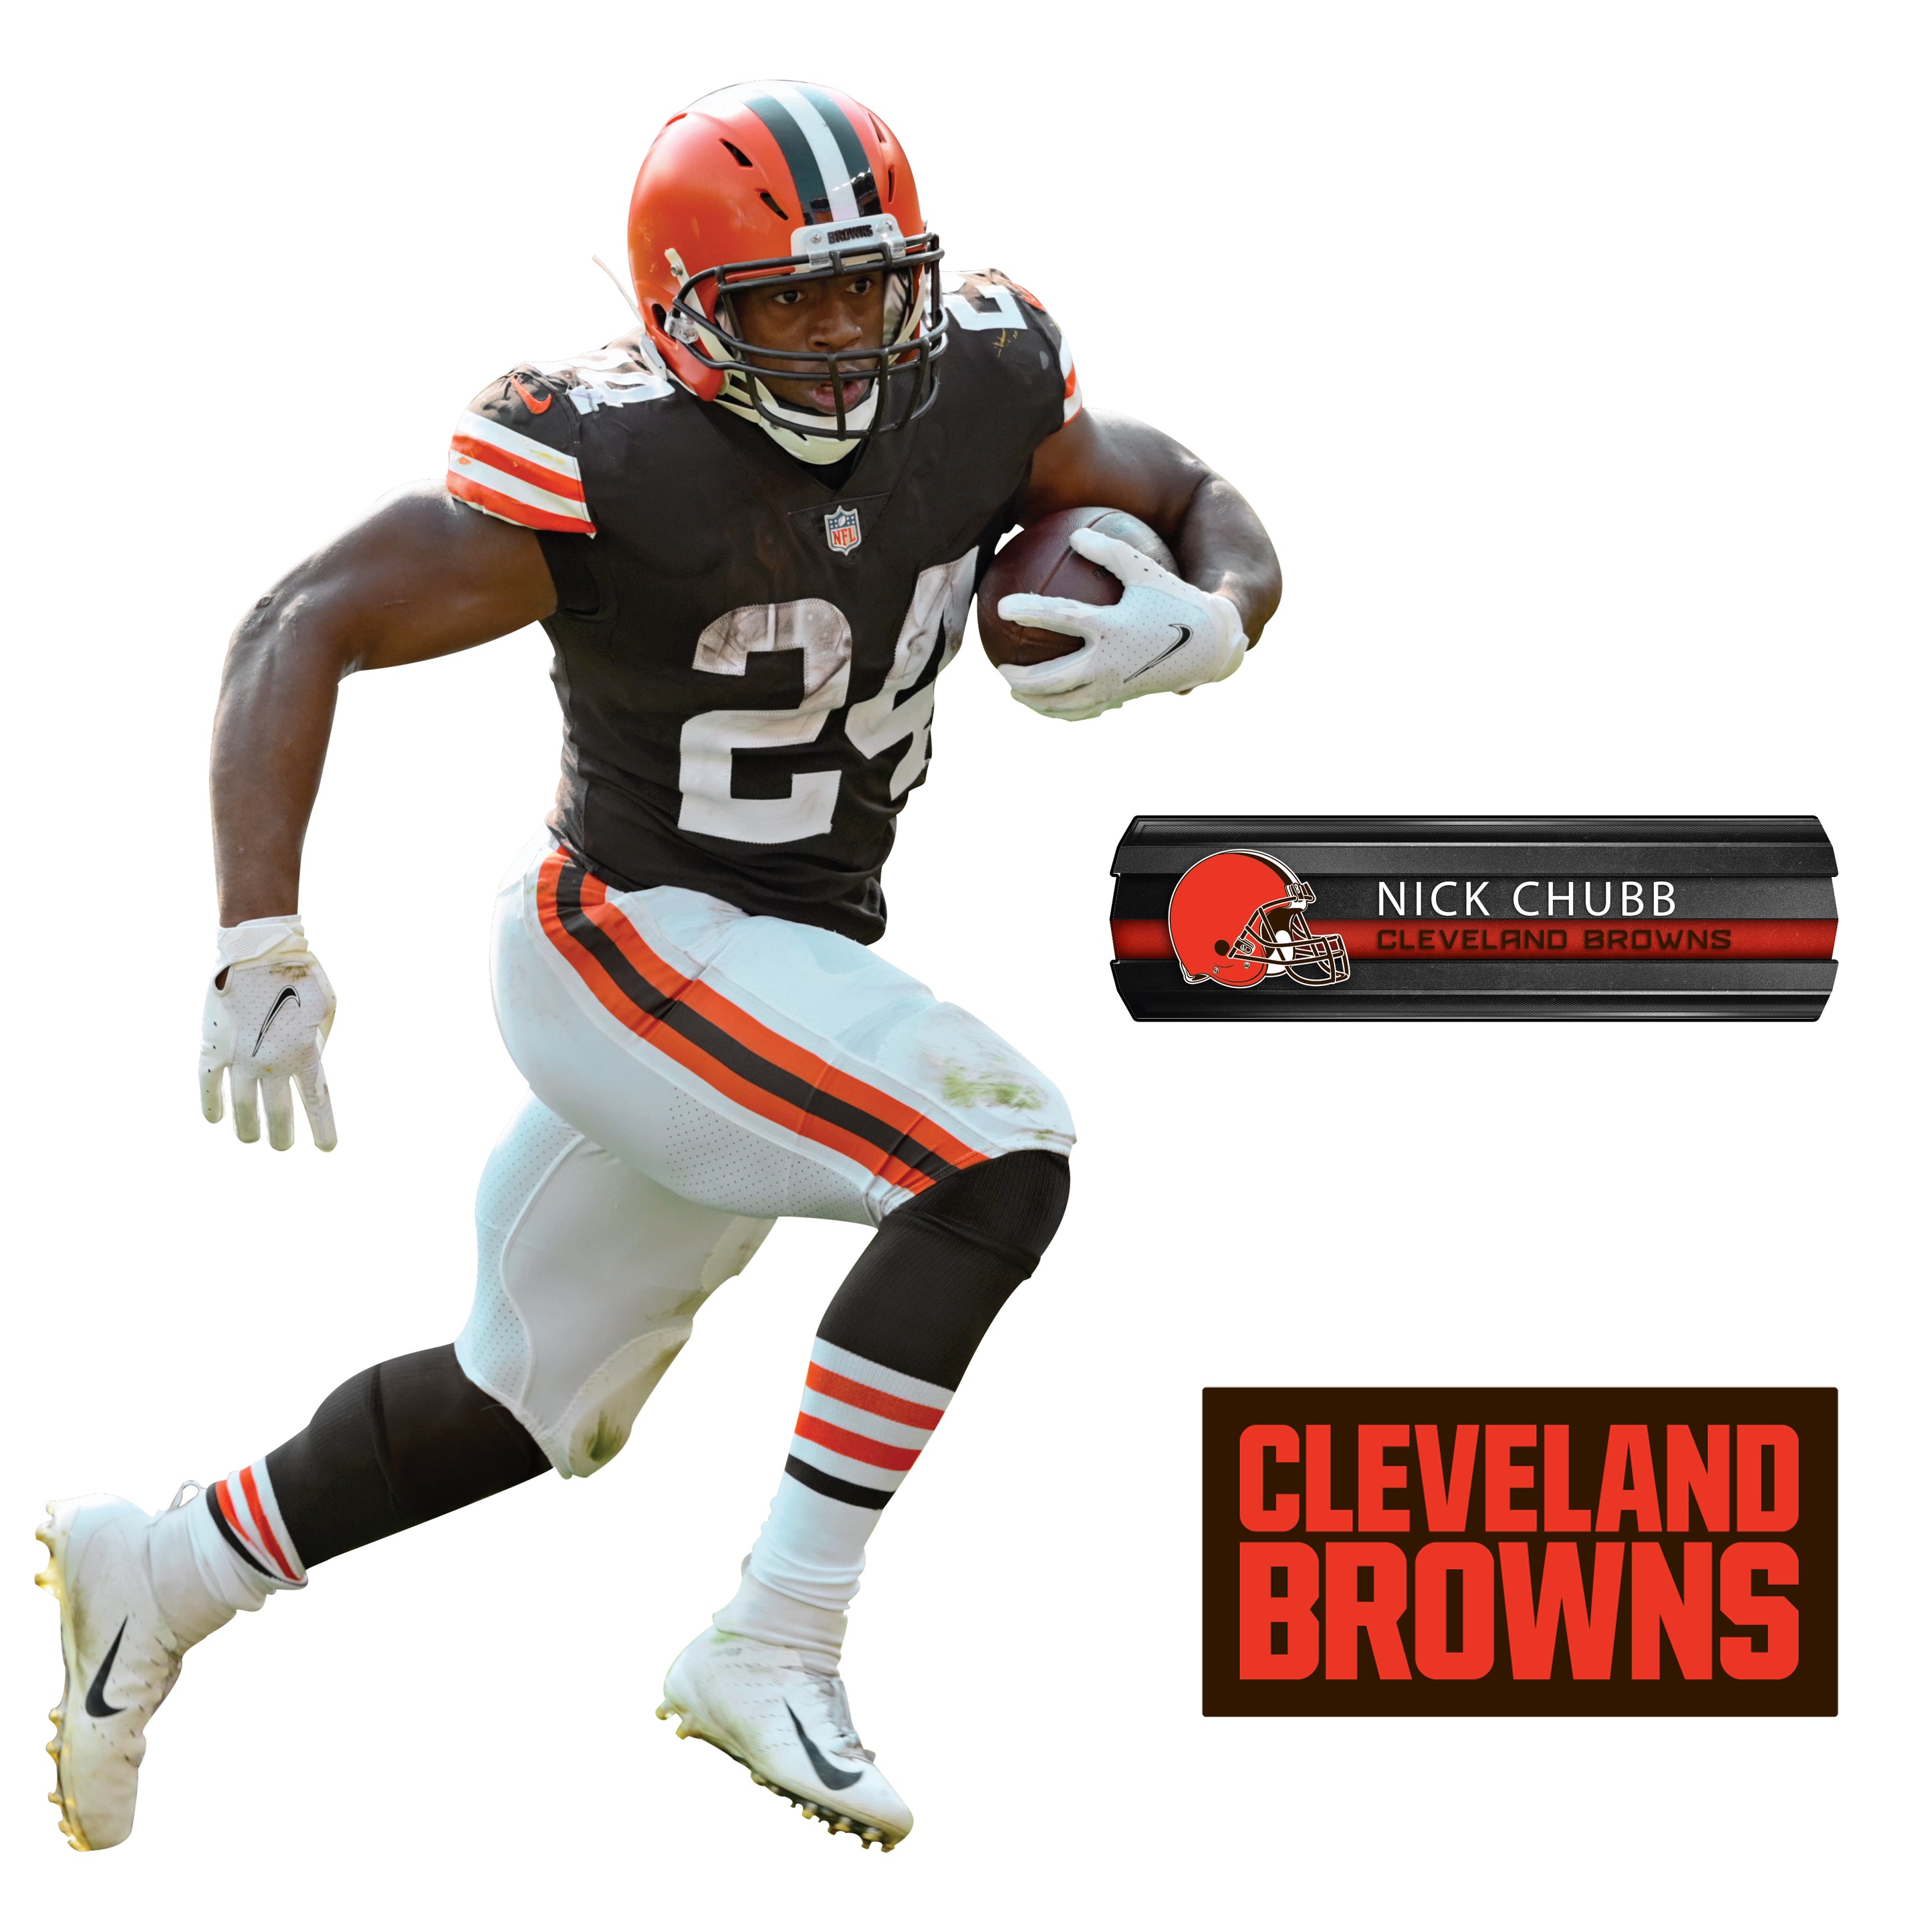 Nick Chubb Officially Licensed Nfl Removable Wall Decal Fathead 